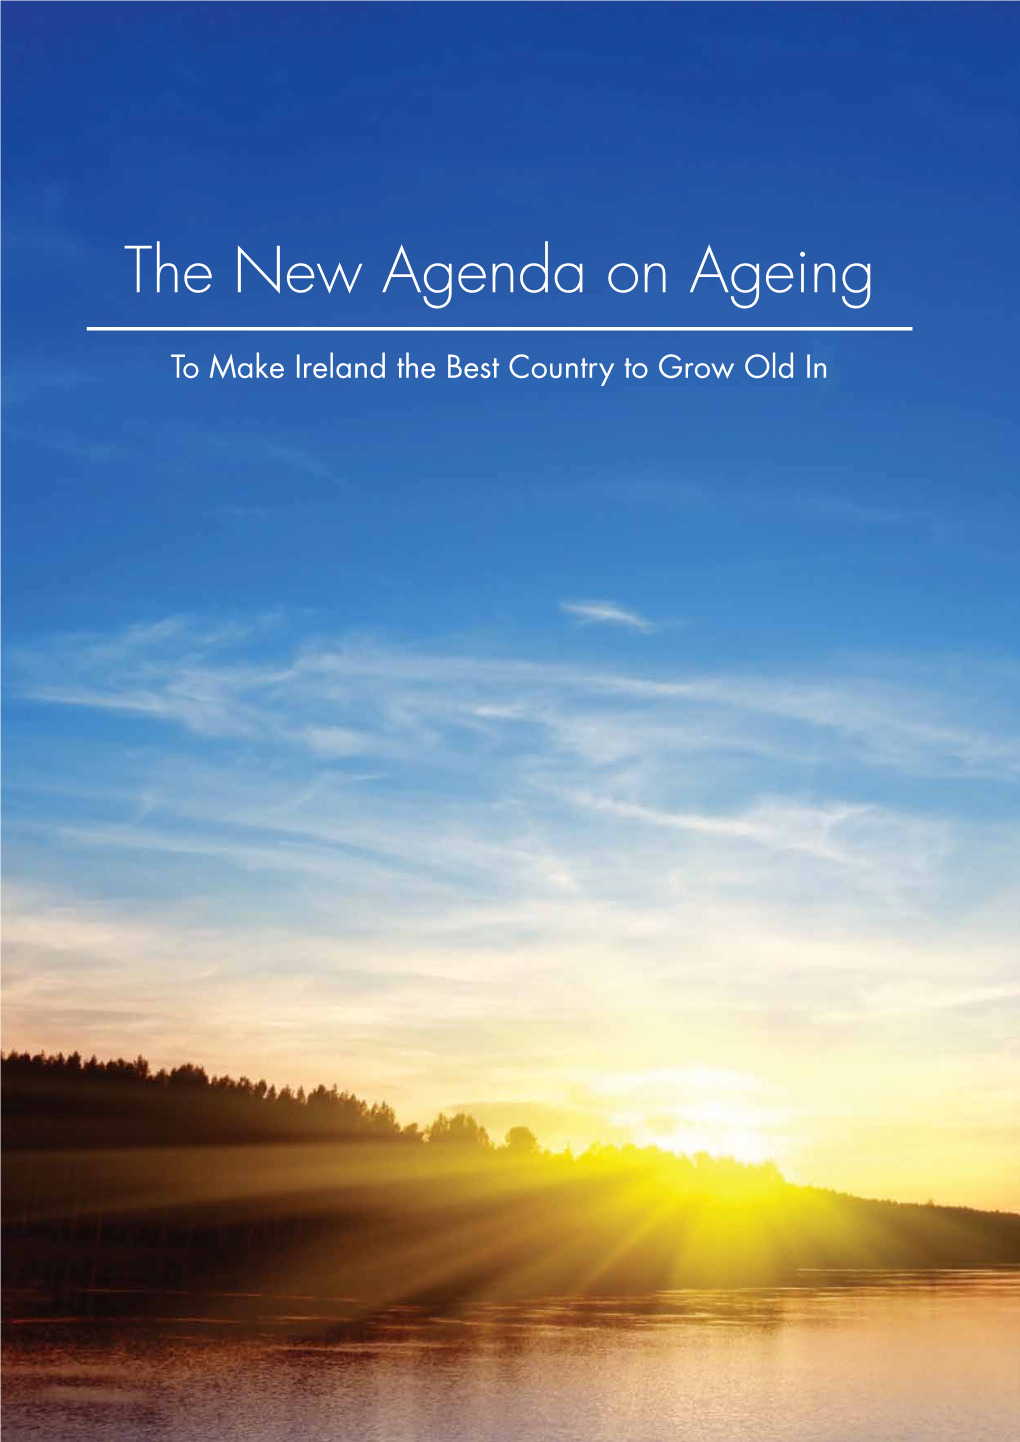 The New Agenda on Ageing